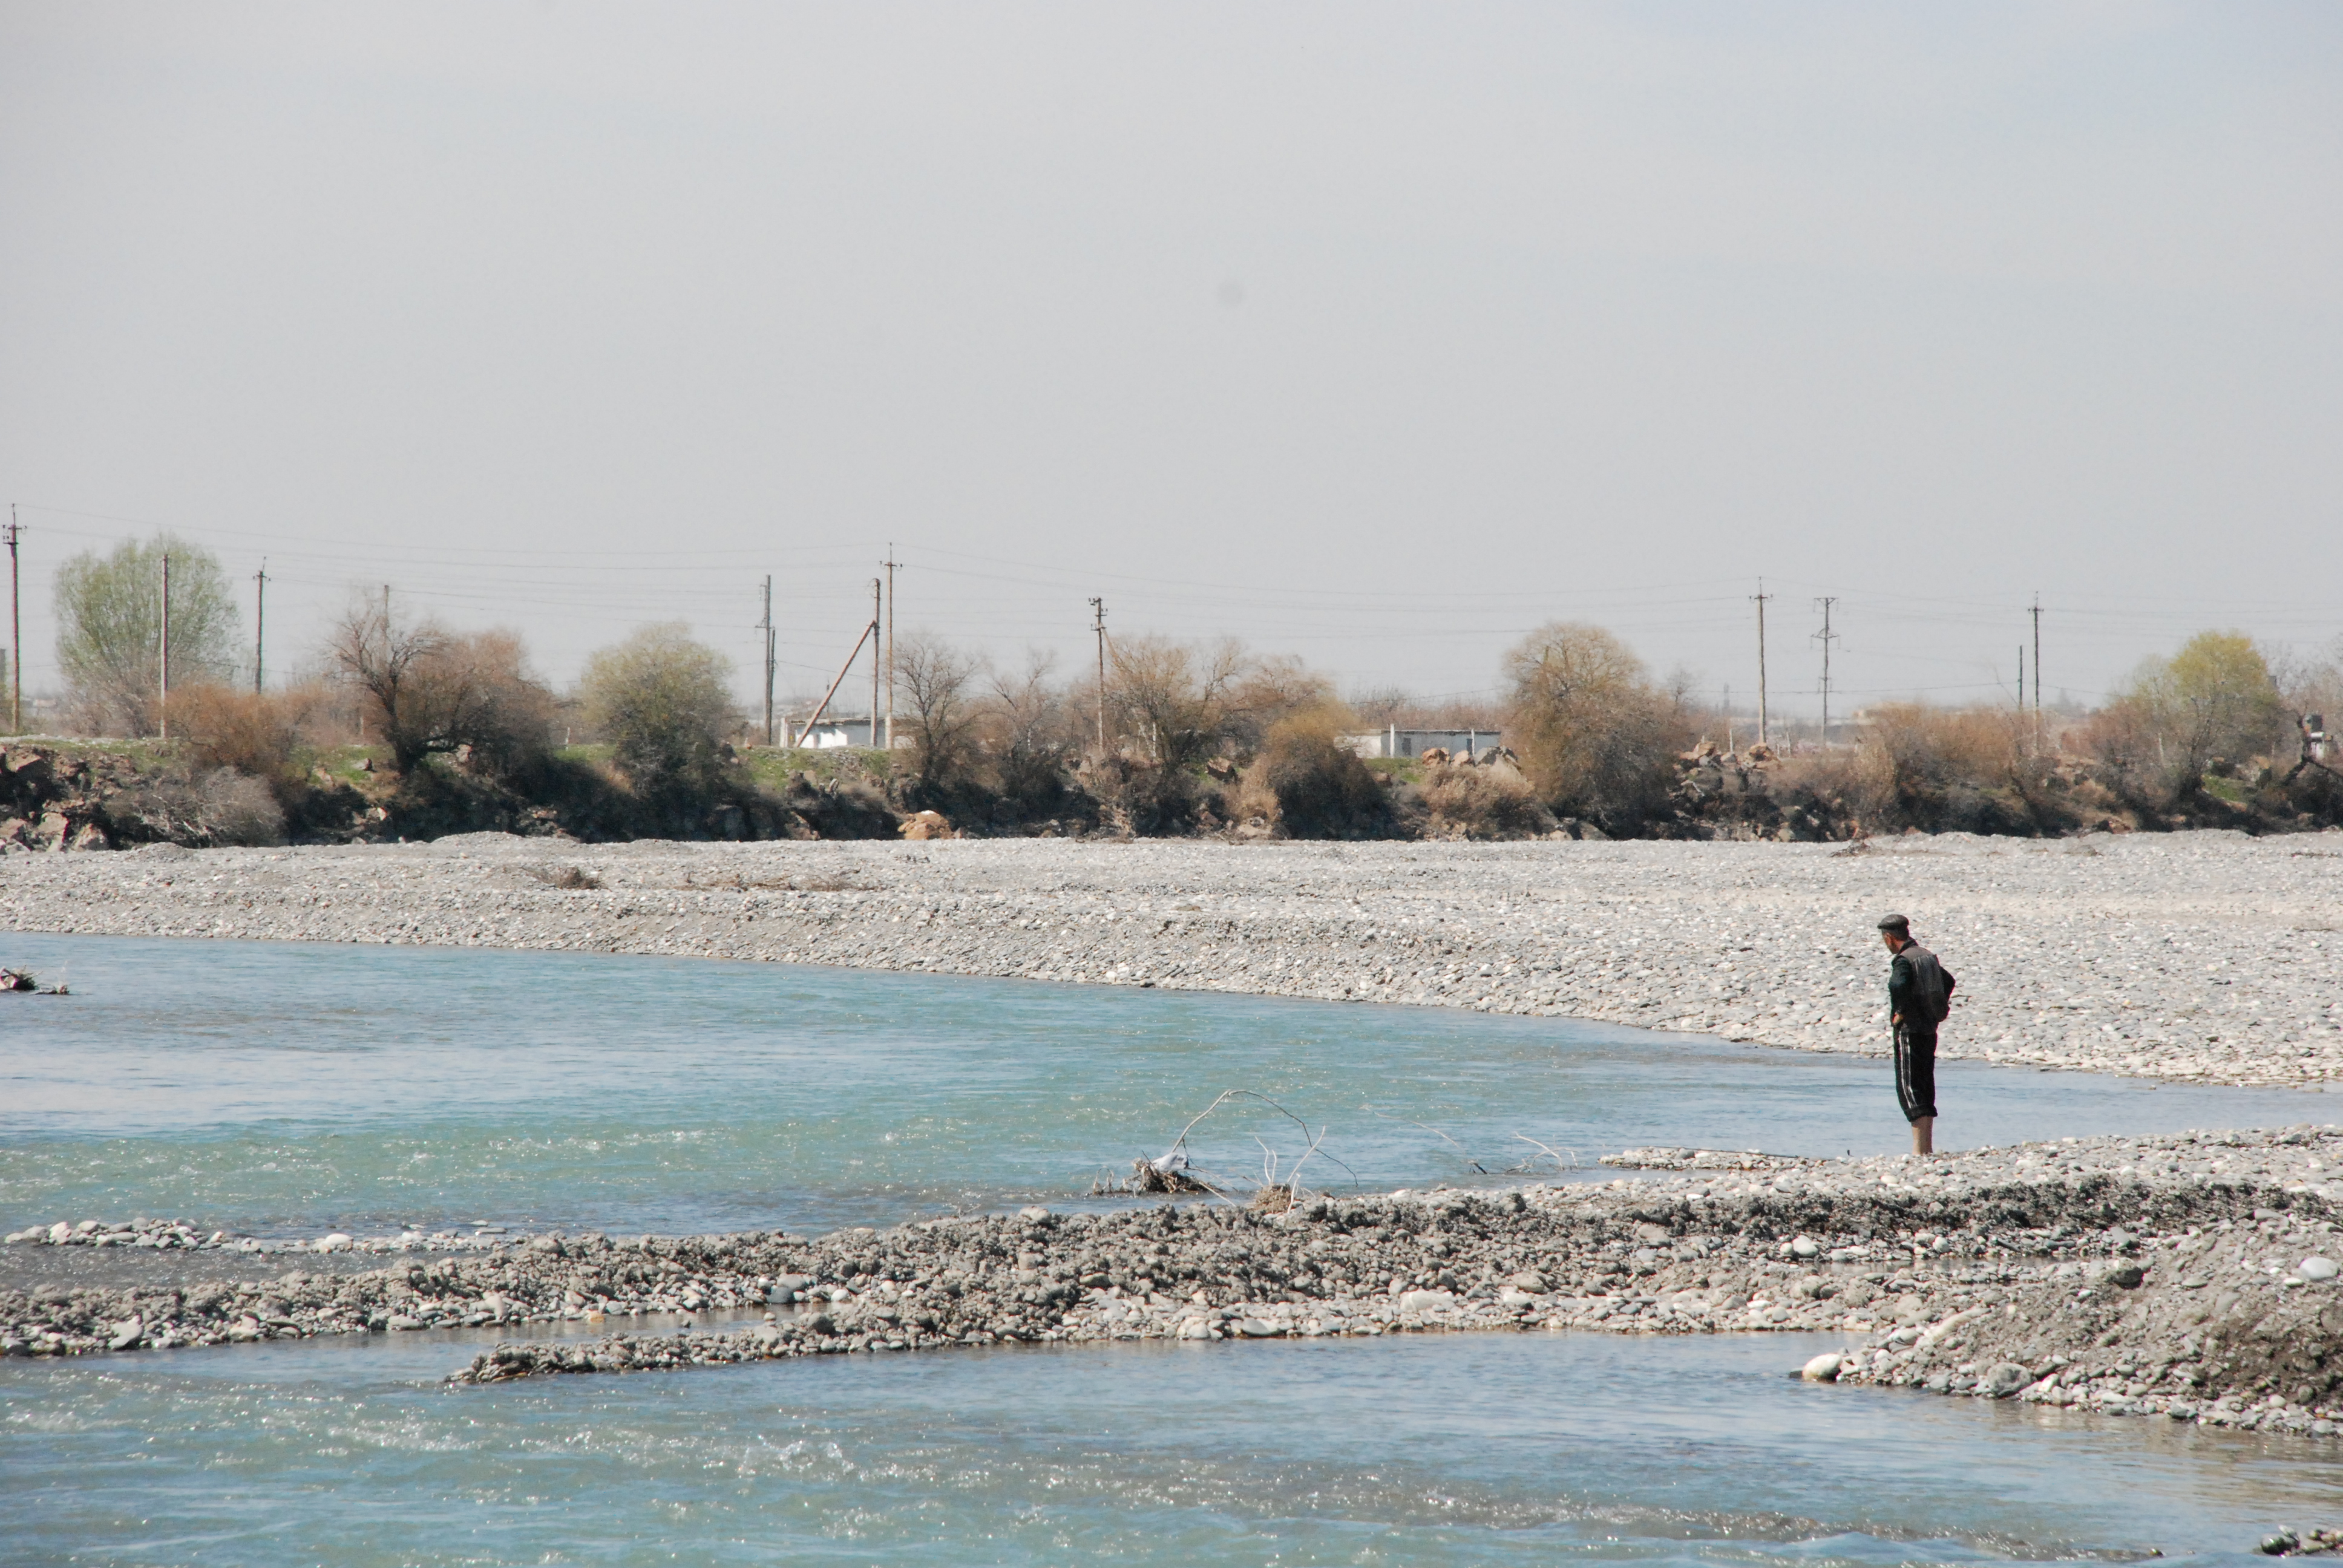 Water policies and development narratives in Central Asia